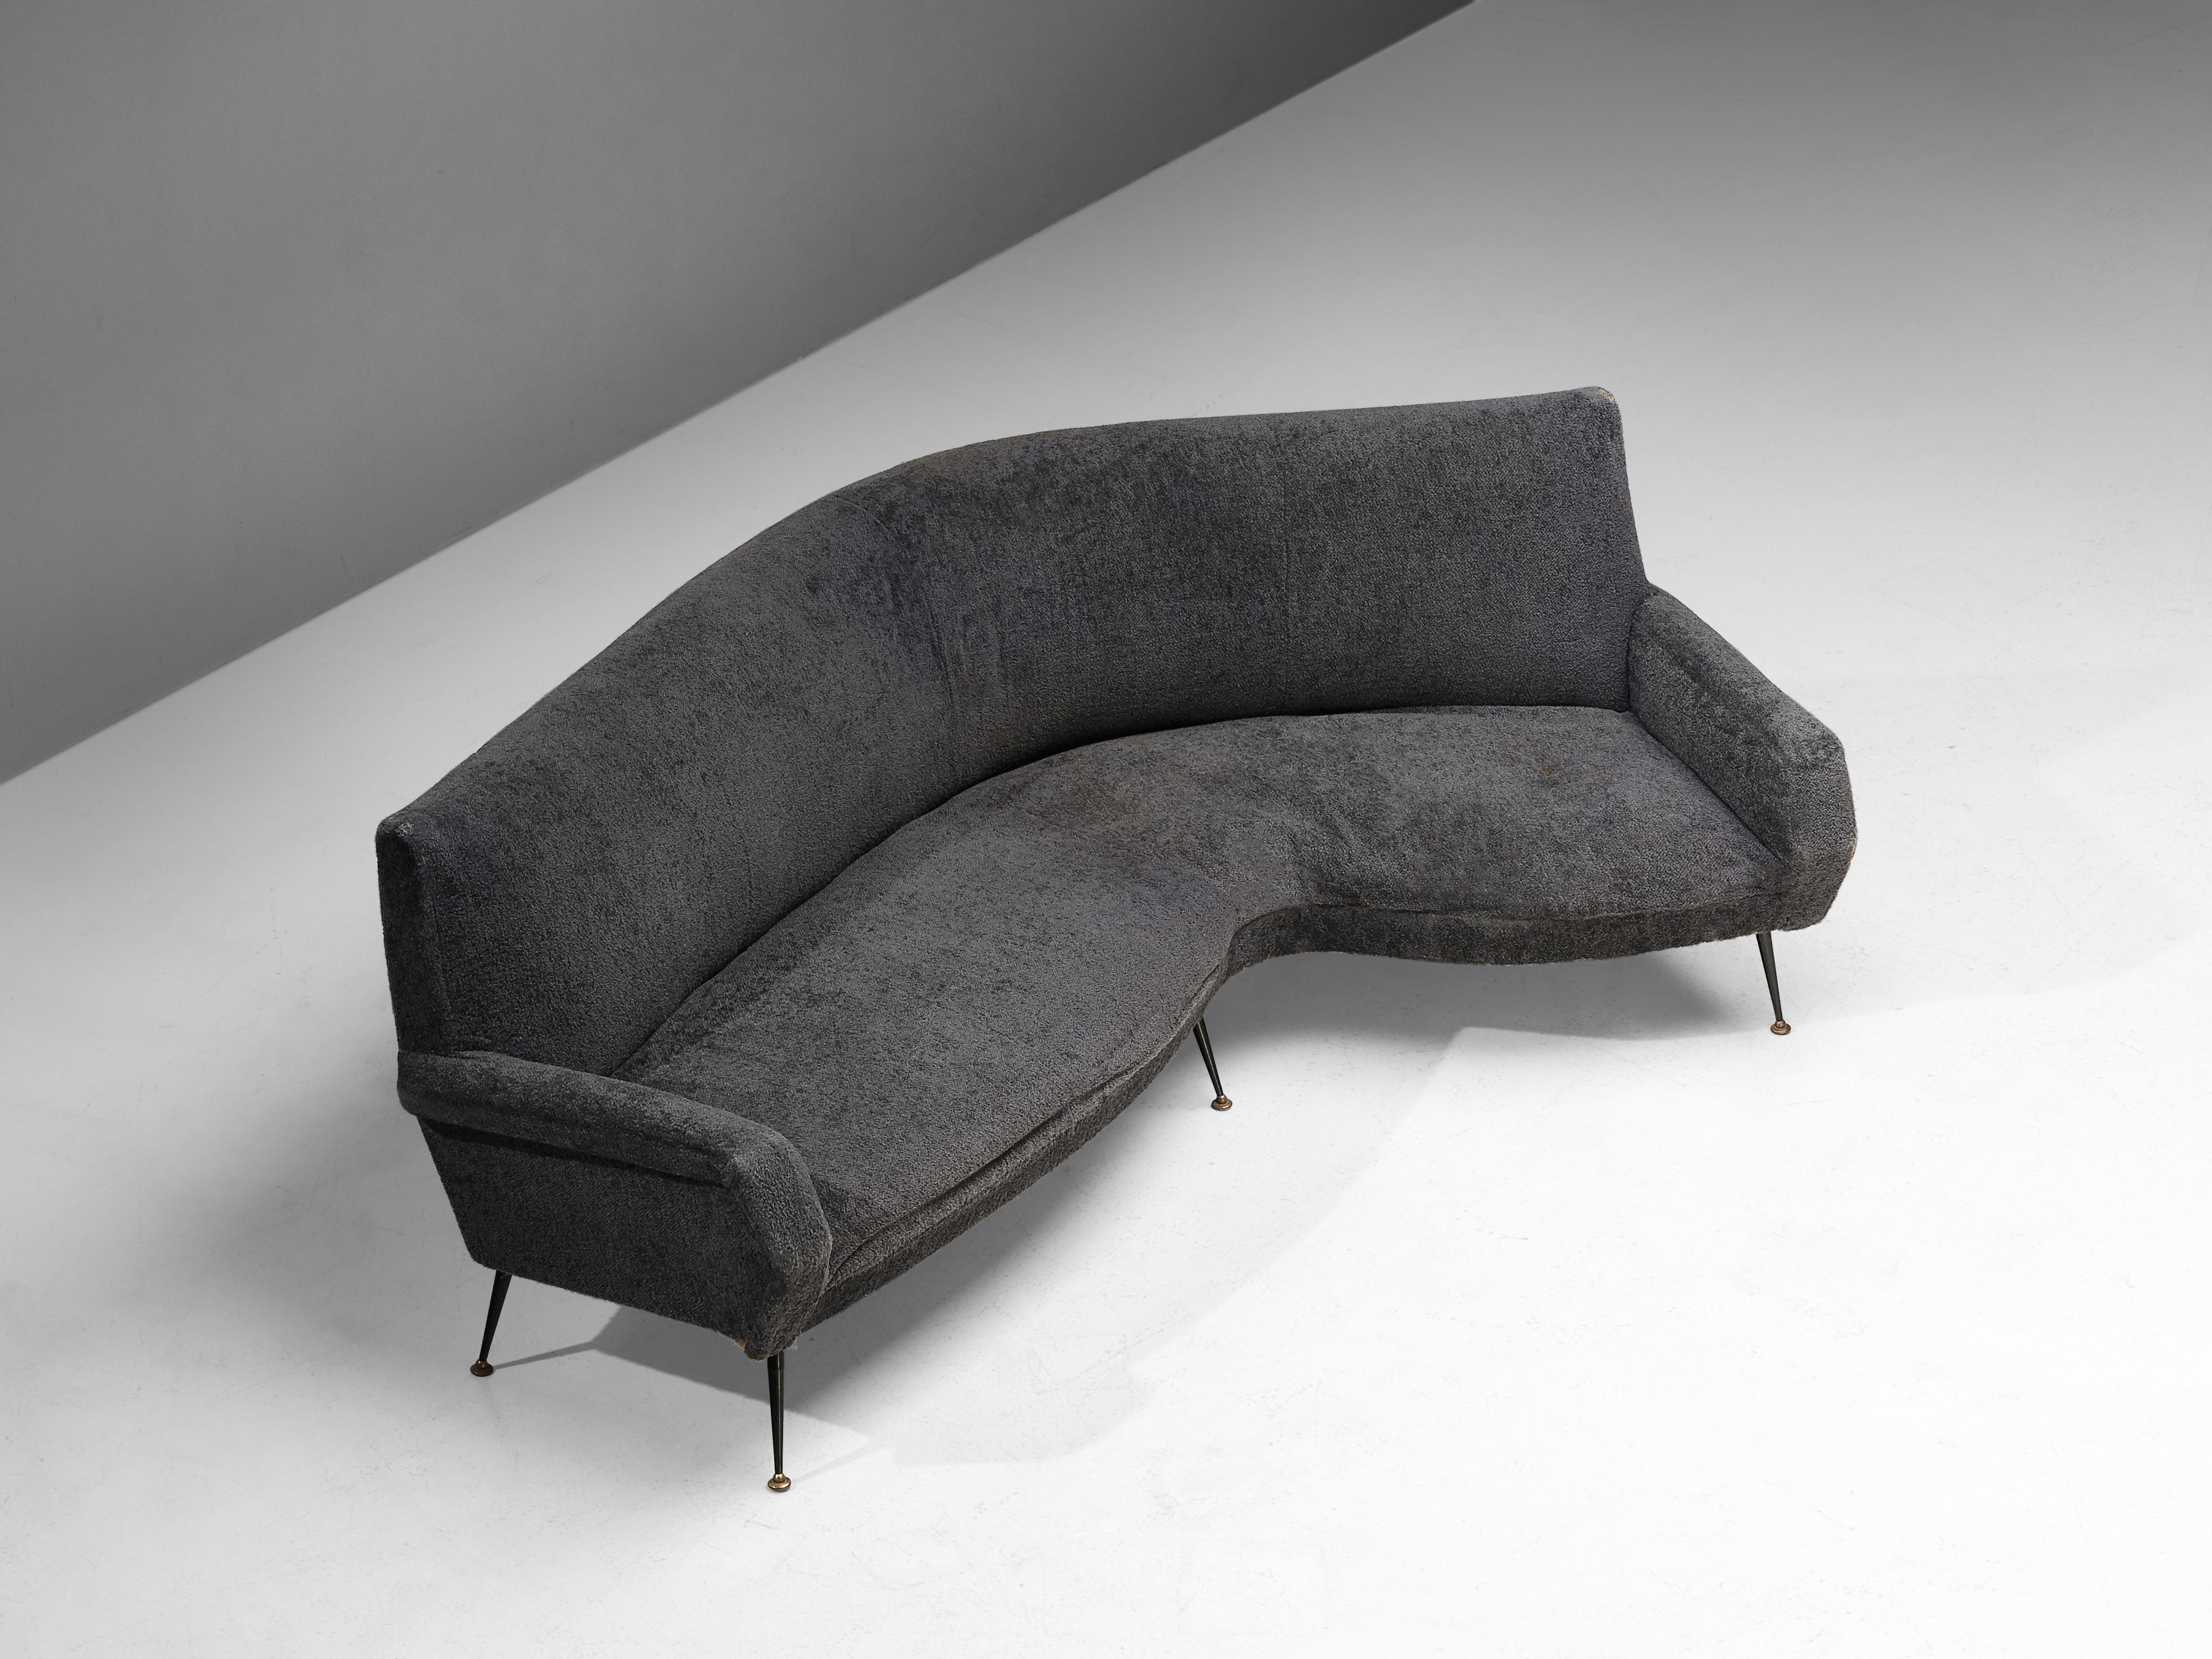 Gigi Radice for Minotti, curved sofa, fabric, brass, metal, Italy, 1960s. 

Gorgeous curved sofa designed by Gigi Radice and manufactured by Minotti. This three-seat sofa has a playful shape due to the curve in the seat and backrest while keeping